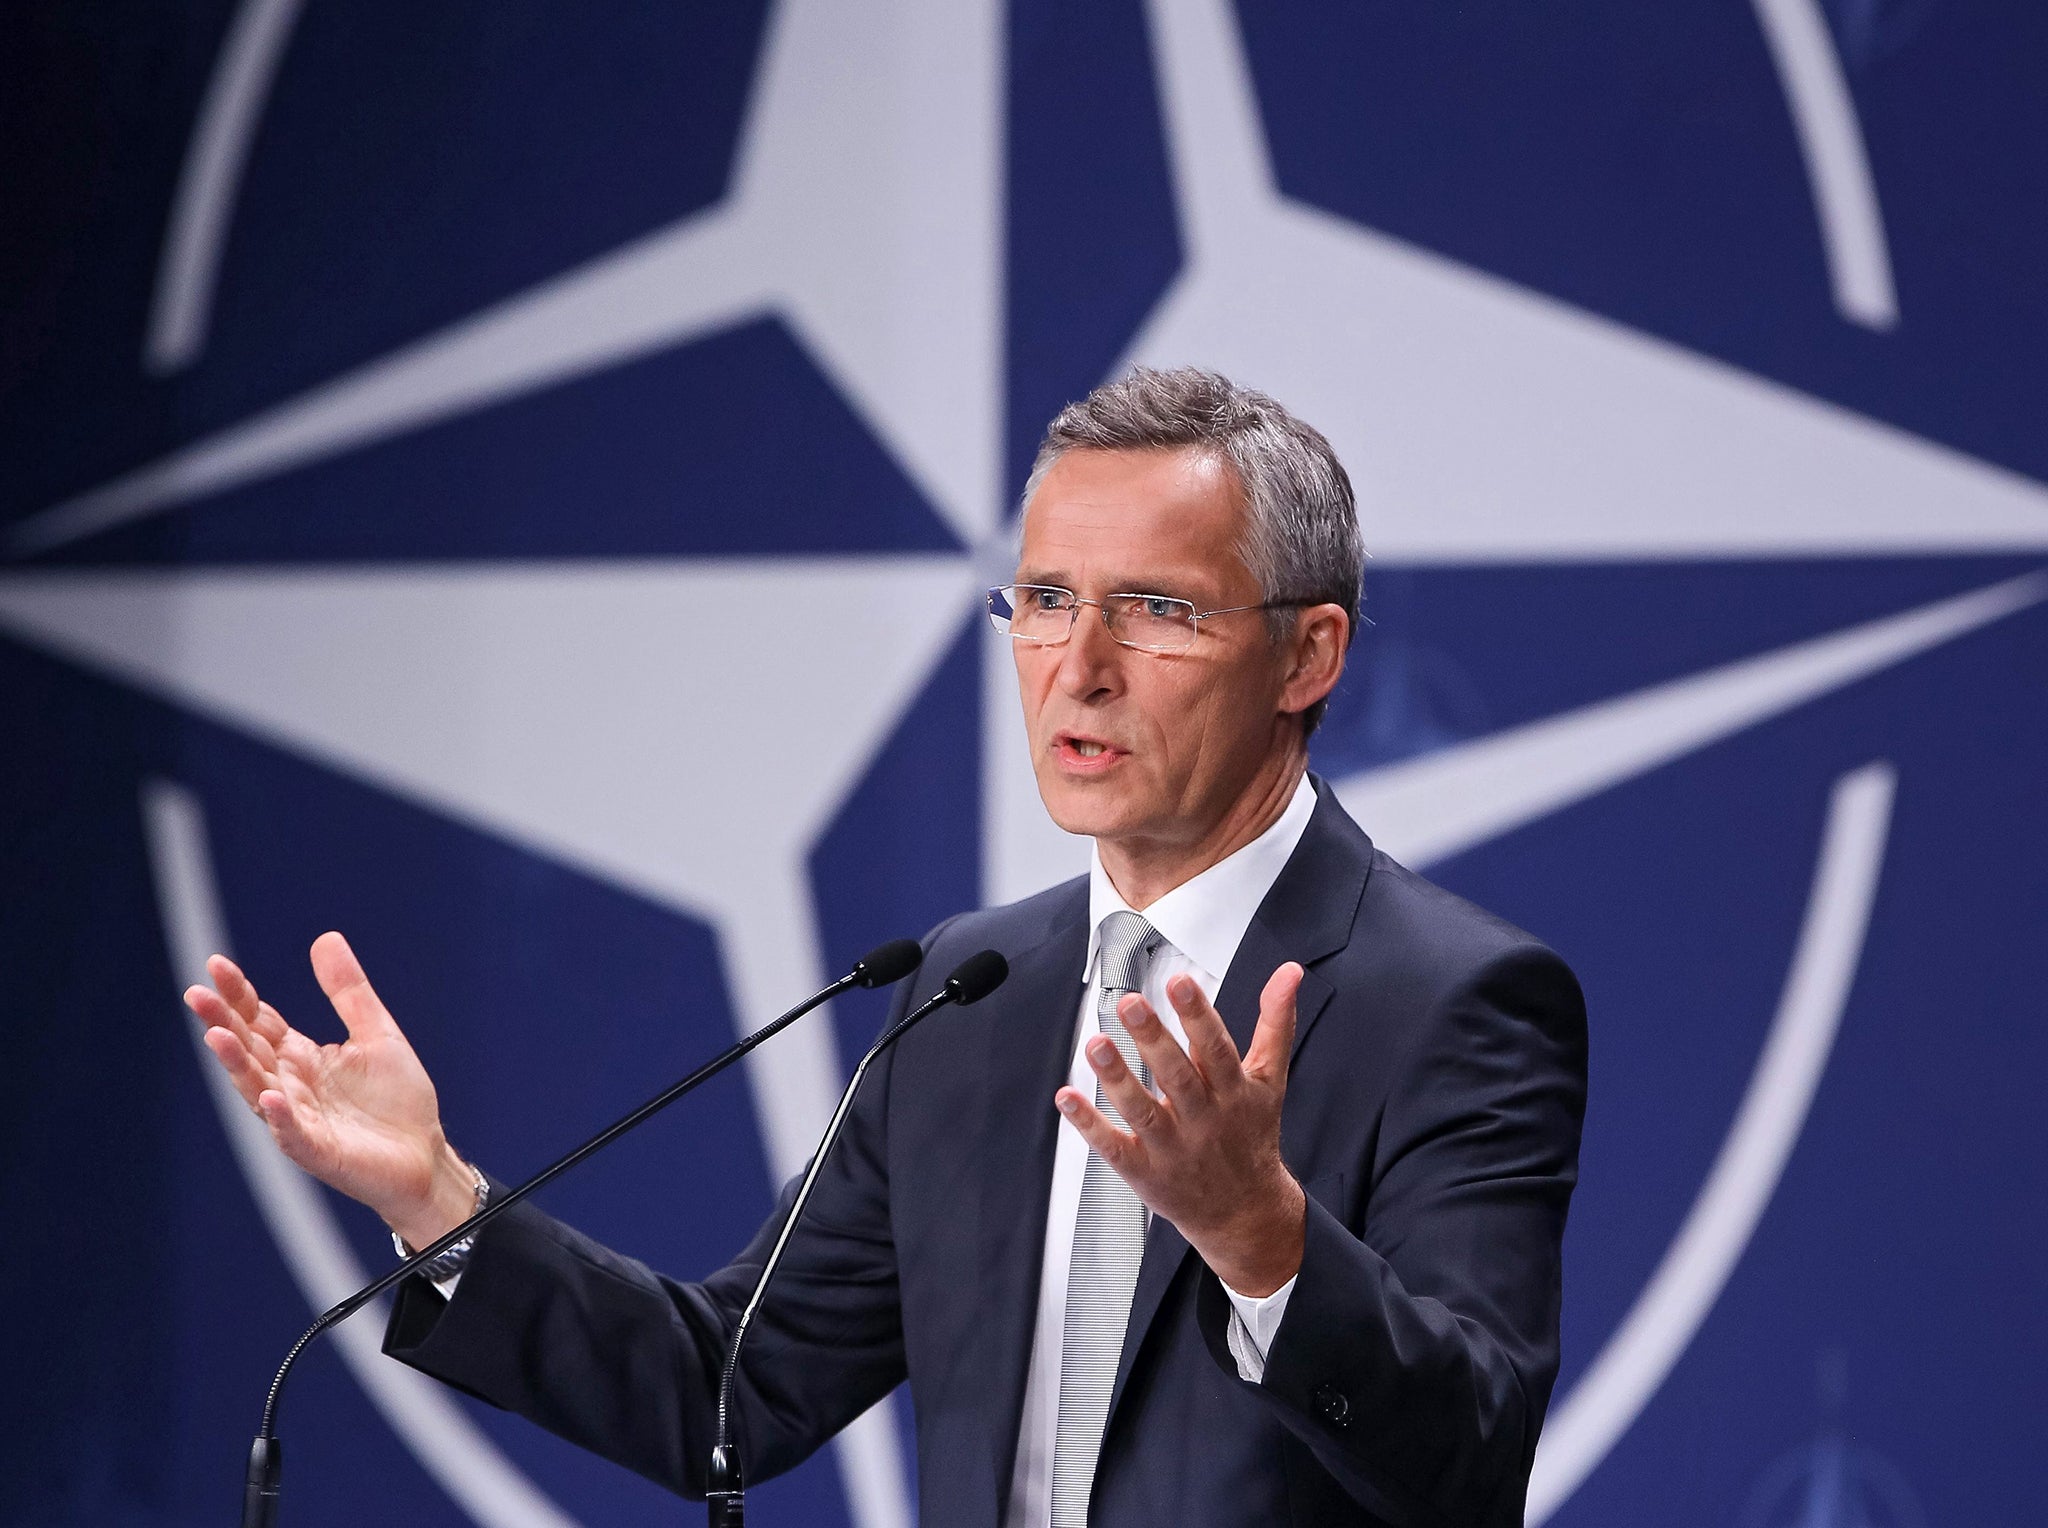 NATO Secretary General Jens Stoltenberg speaks at a press conference at the second day of NATO Summit in Warsaw, Poland